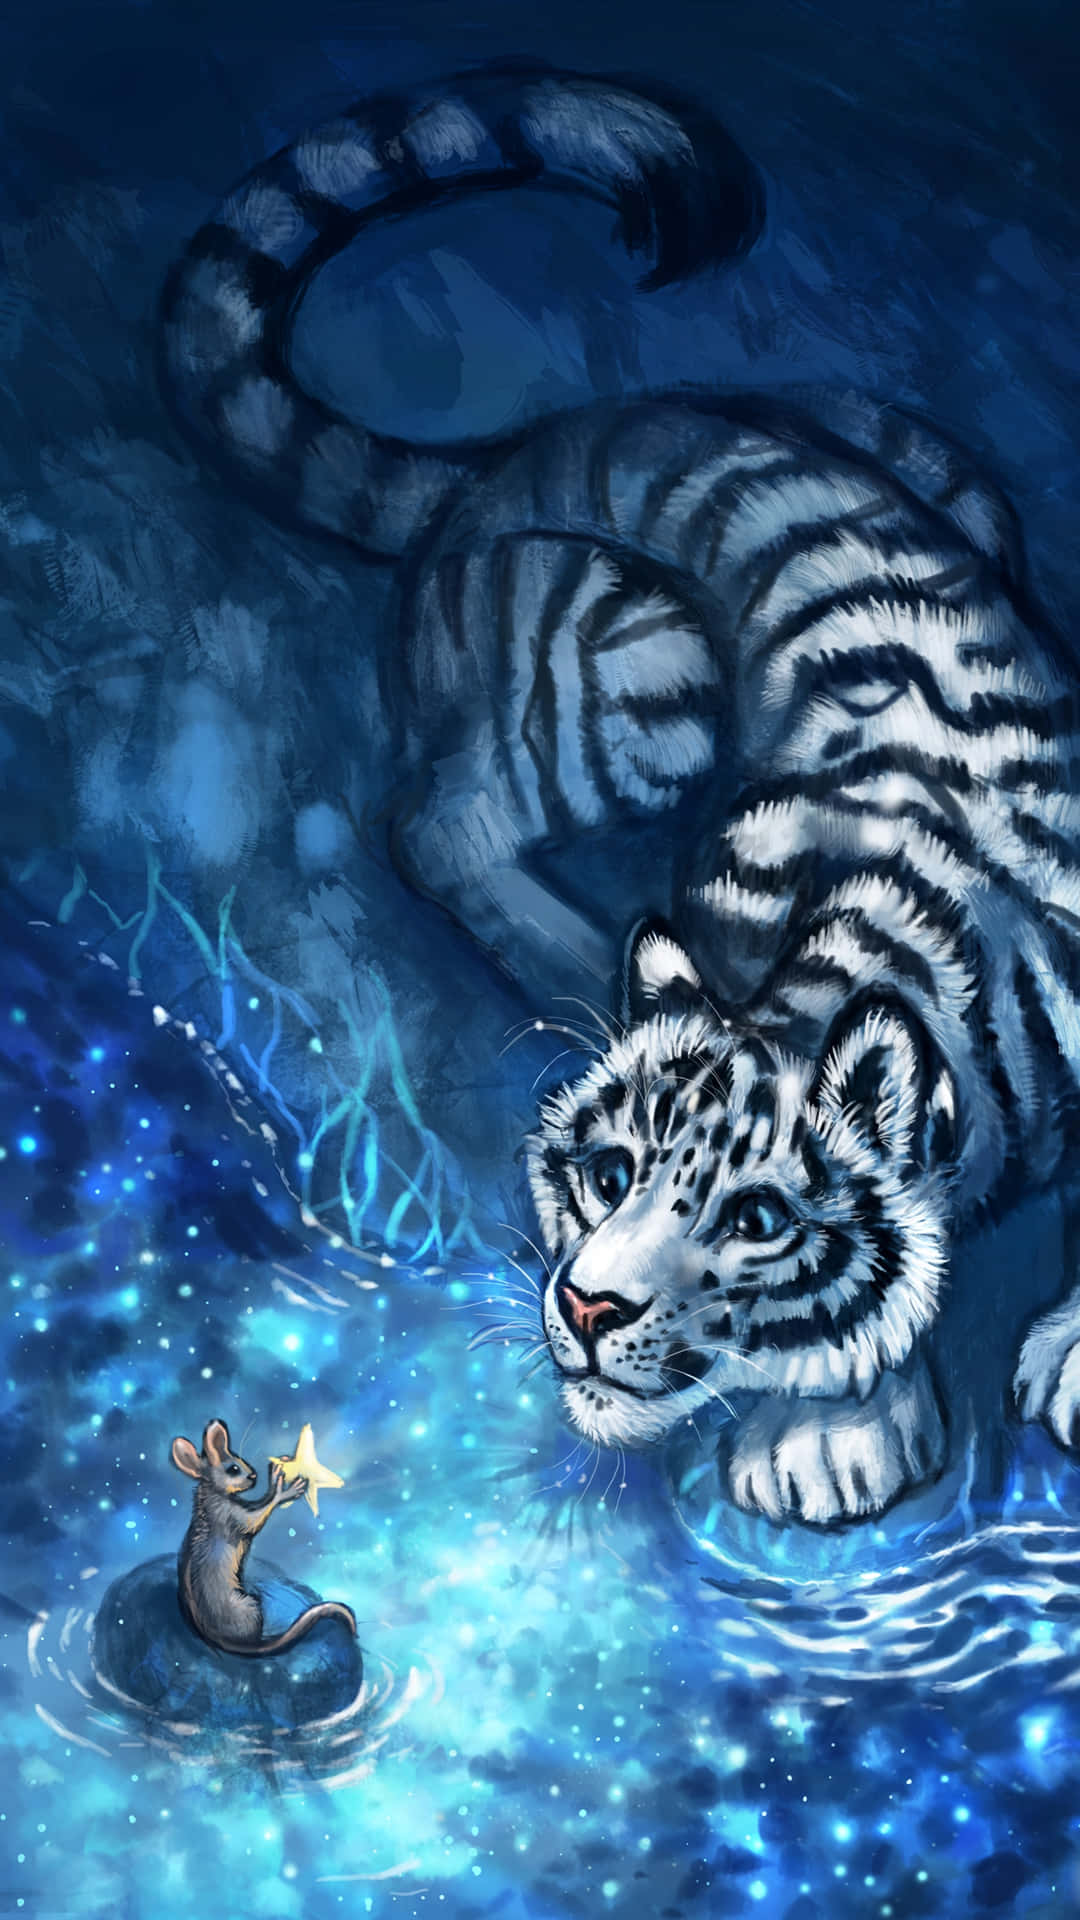 A White Tiger And A Mouse In The Water Wallpaper